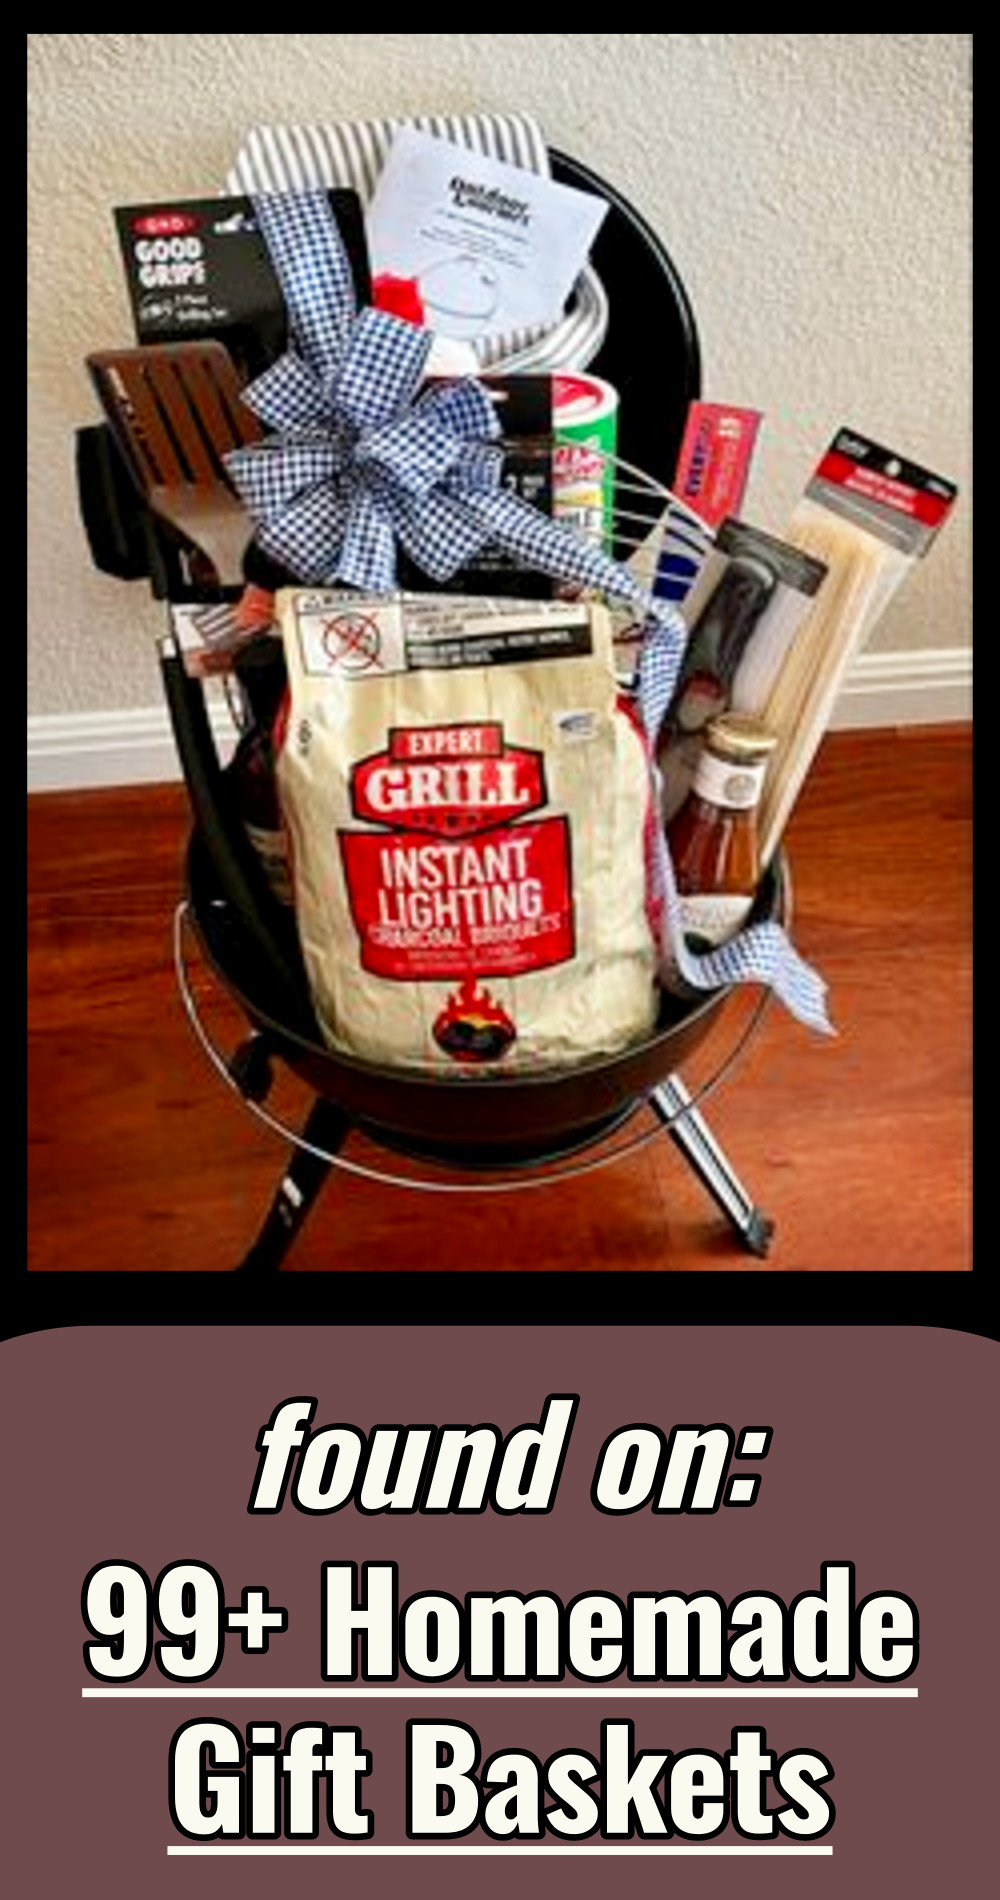 cookout themed grilling gift baskets for a fundraiser raffle